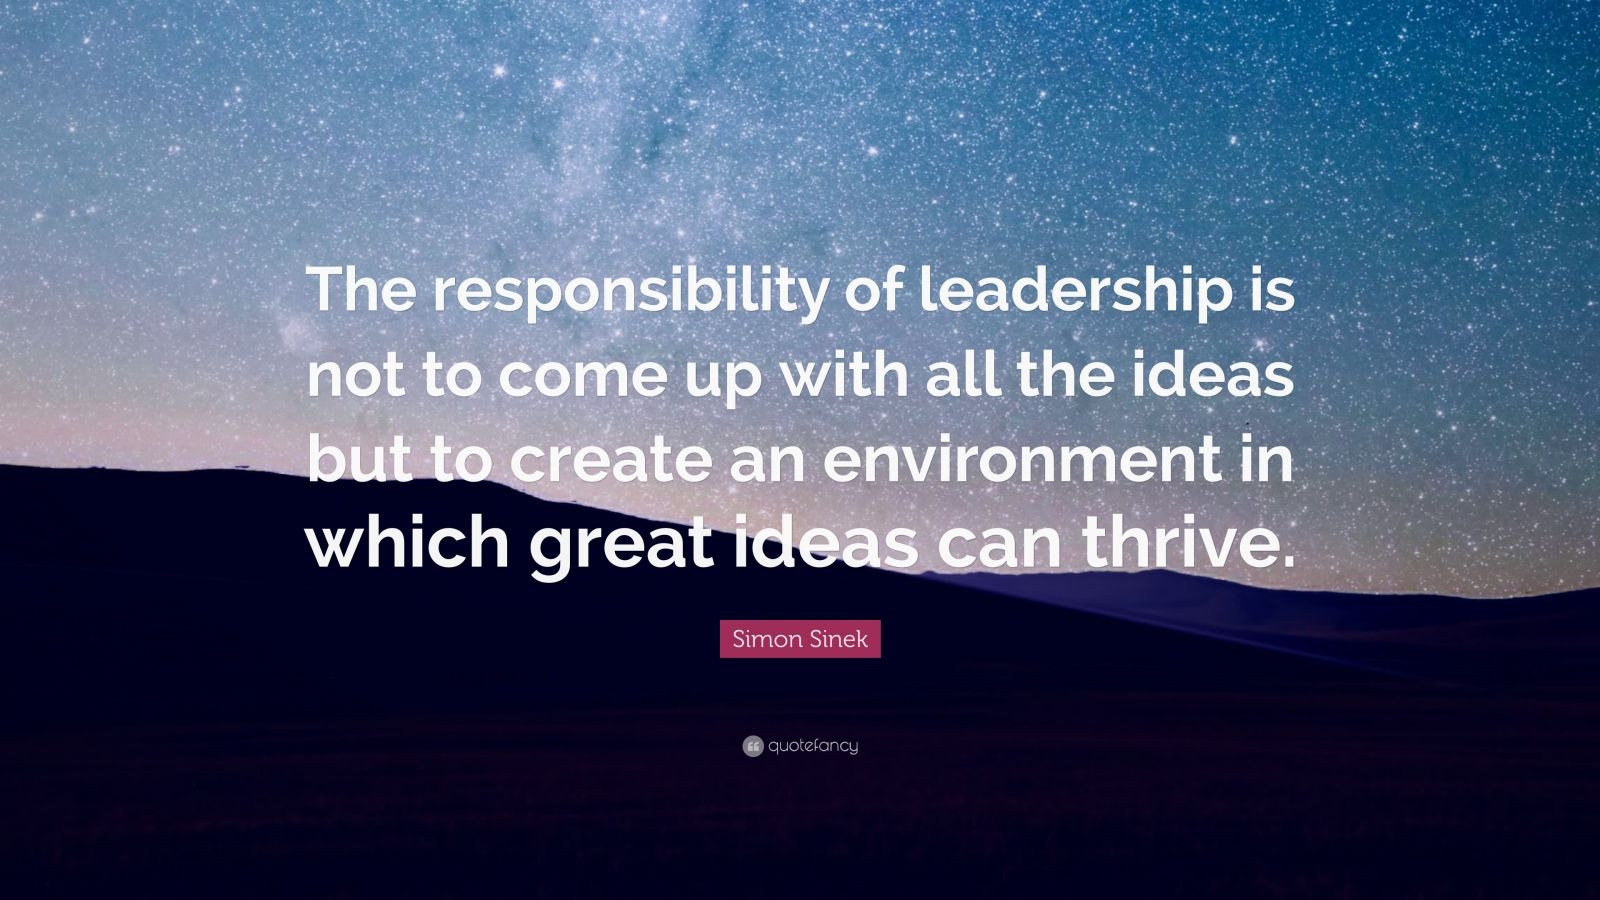 Simon Sinek Quote: “The responsibility of leadership is not to come up ...